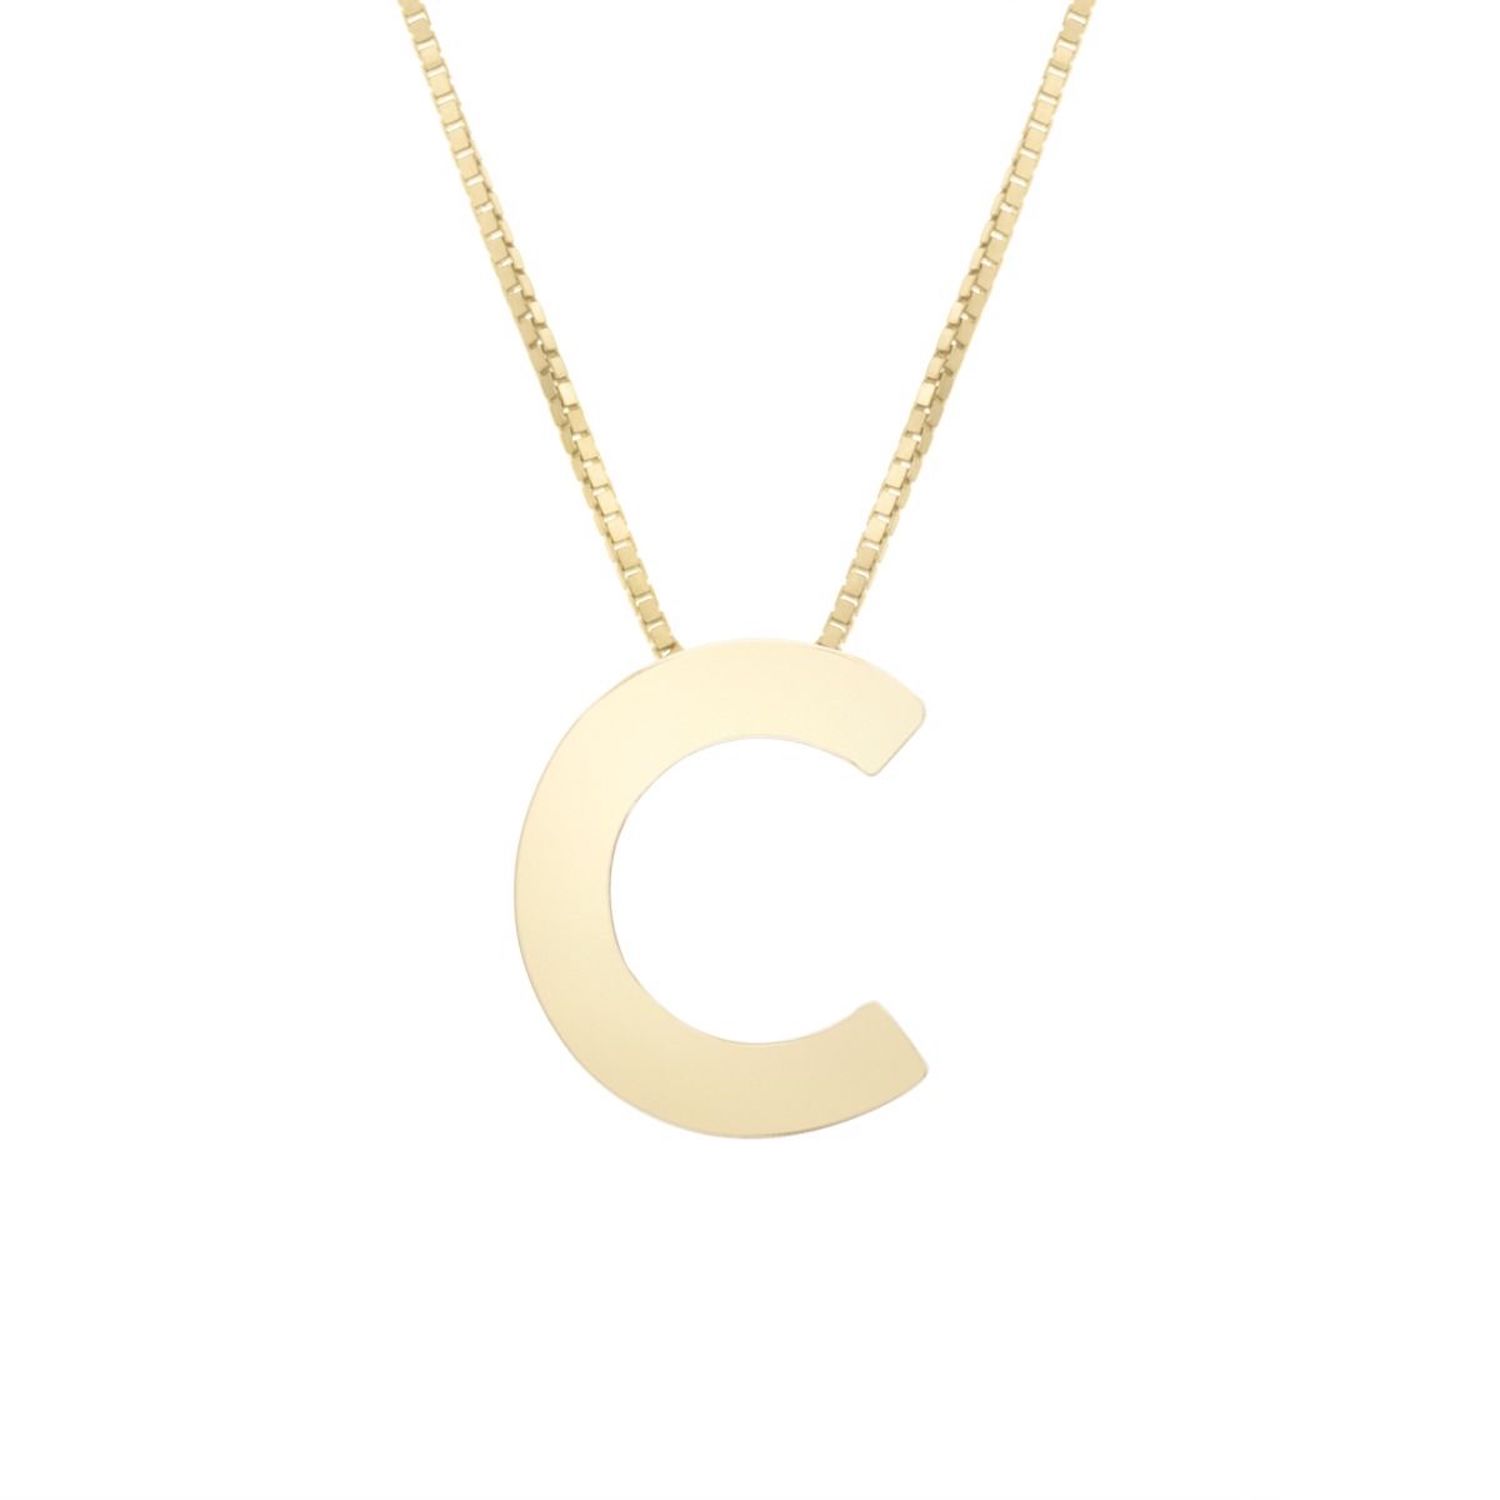 14K Yellow Gold Block Letter Initial Pendant Box Chain Necklace 16"-18" - C